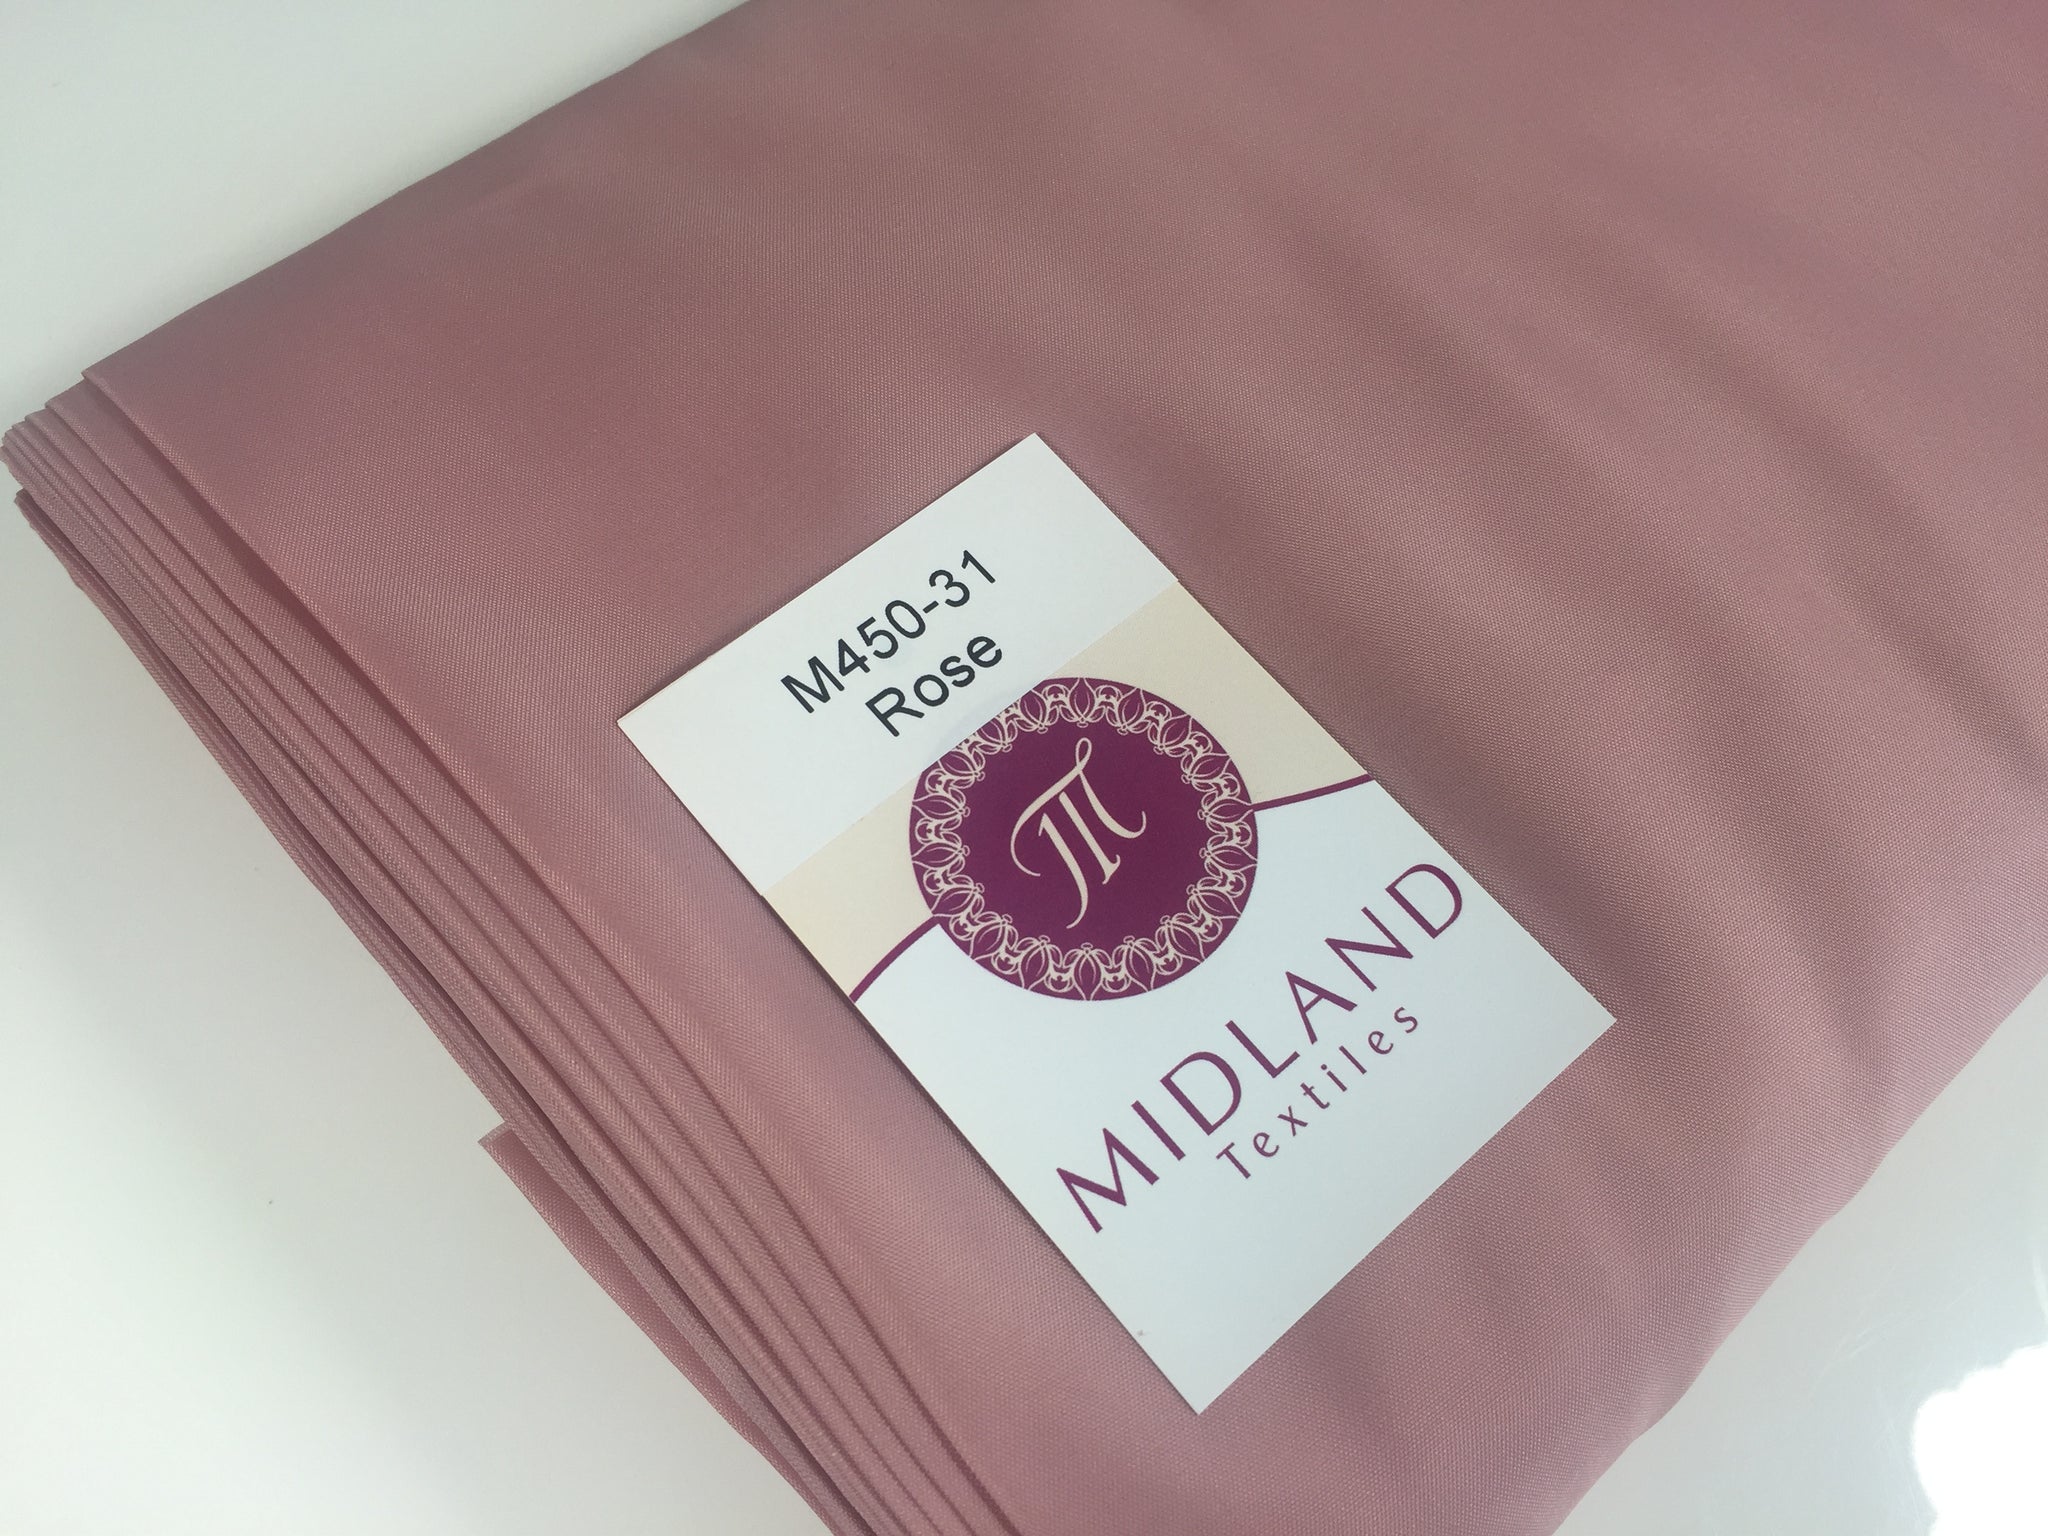 HIGH QUALITY ANTI STATIC DRESS LINING FABRIC 100% POLYESTER 158CM WIDE M450  SOLD PER METRE MTEX